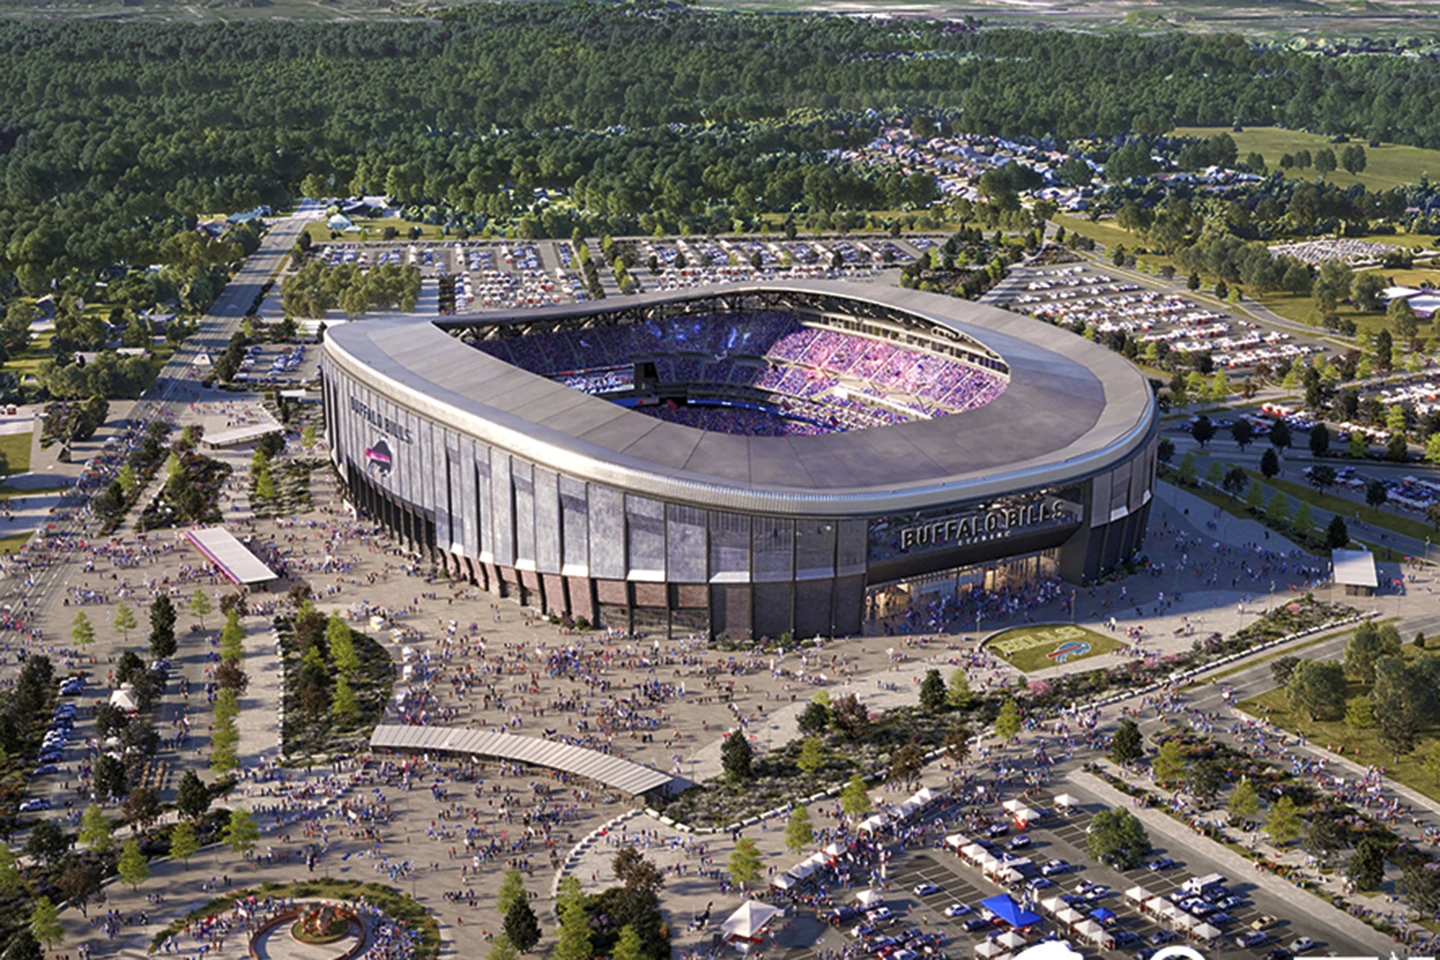 A rendering of the proposed new buffalo bills stadium